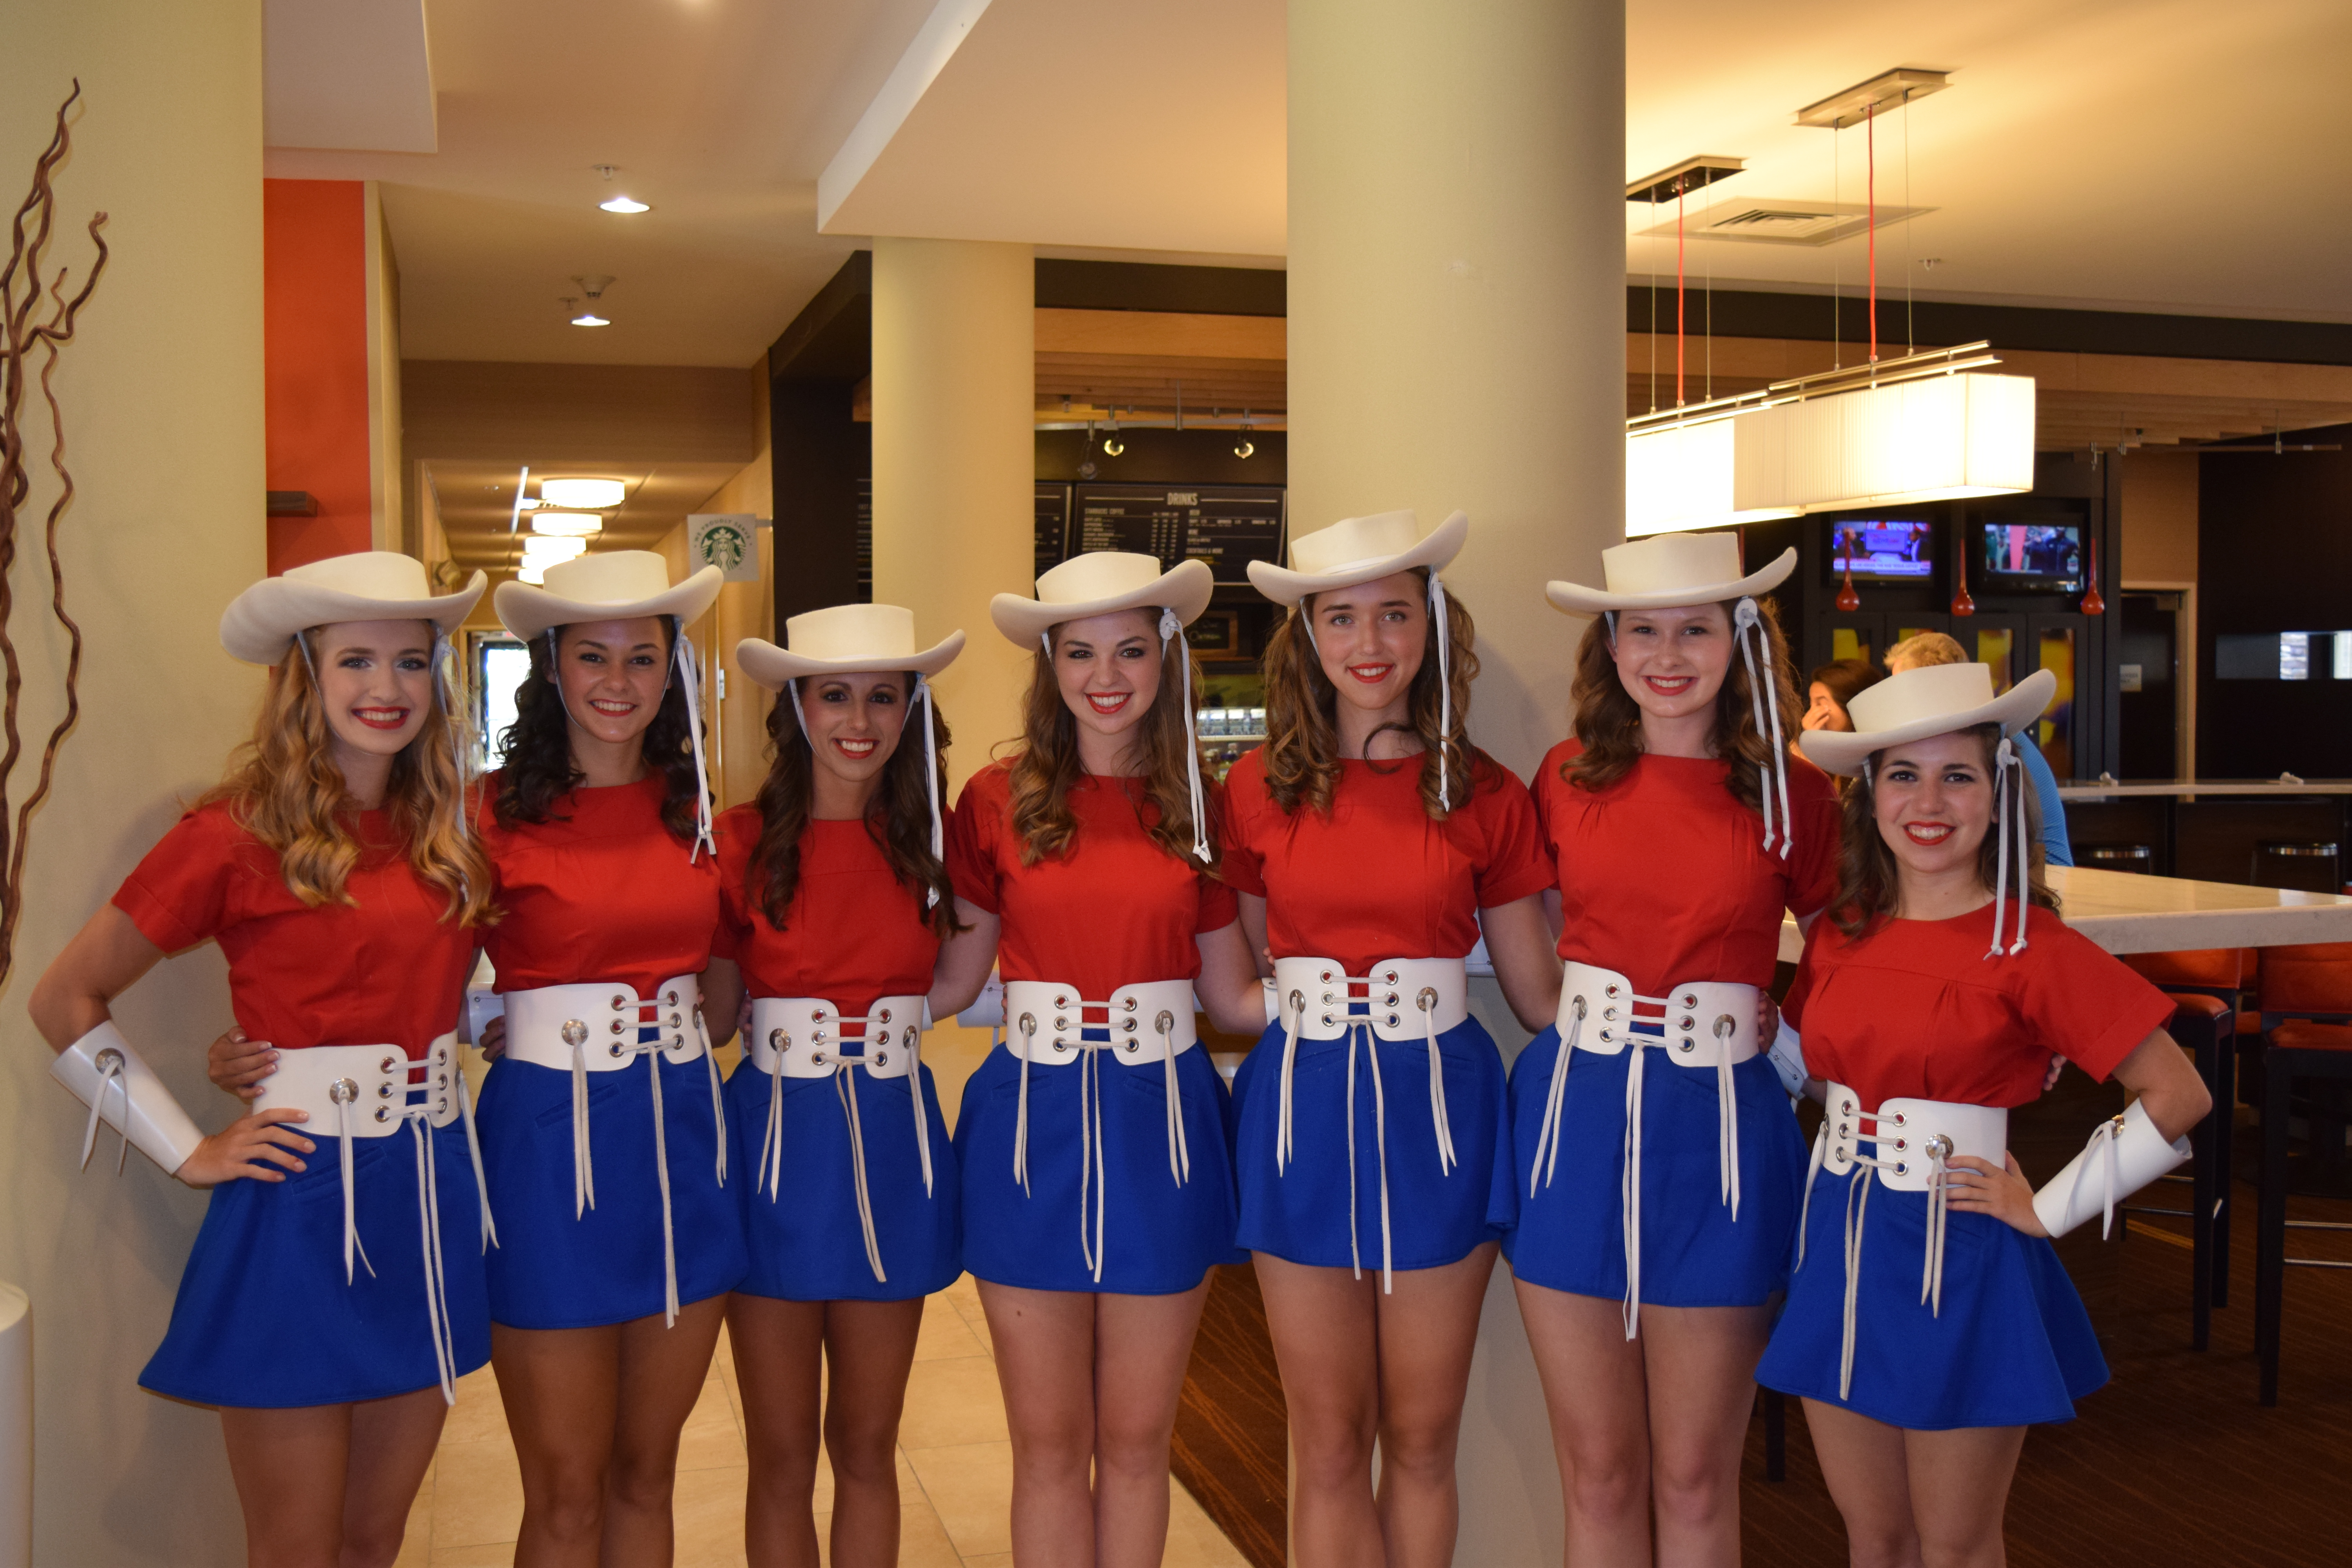 Image: Members of the Kilgore College Rangerettes pose for a photo during the 2015 Gulf Coast Film and Video Festival. Photo by The Signal reporter Zachery Sang.